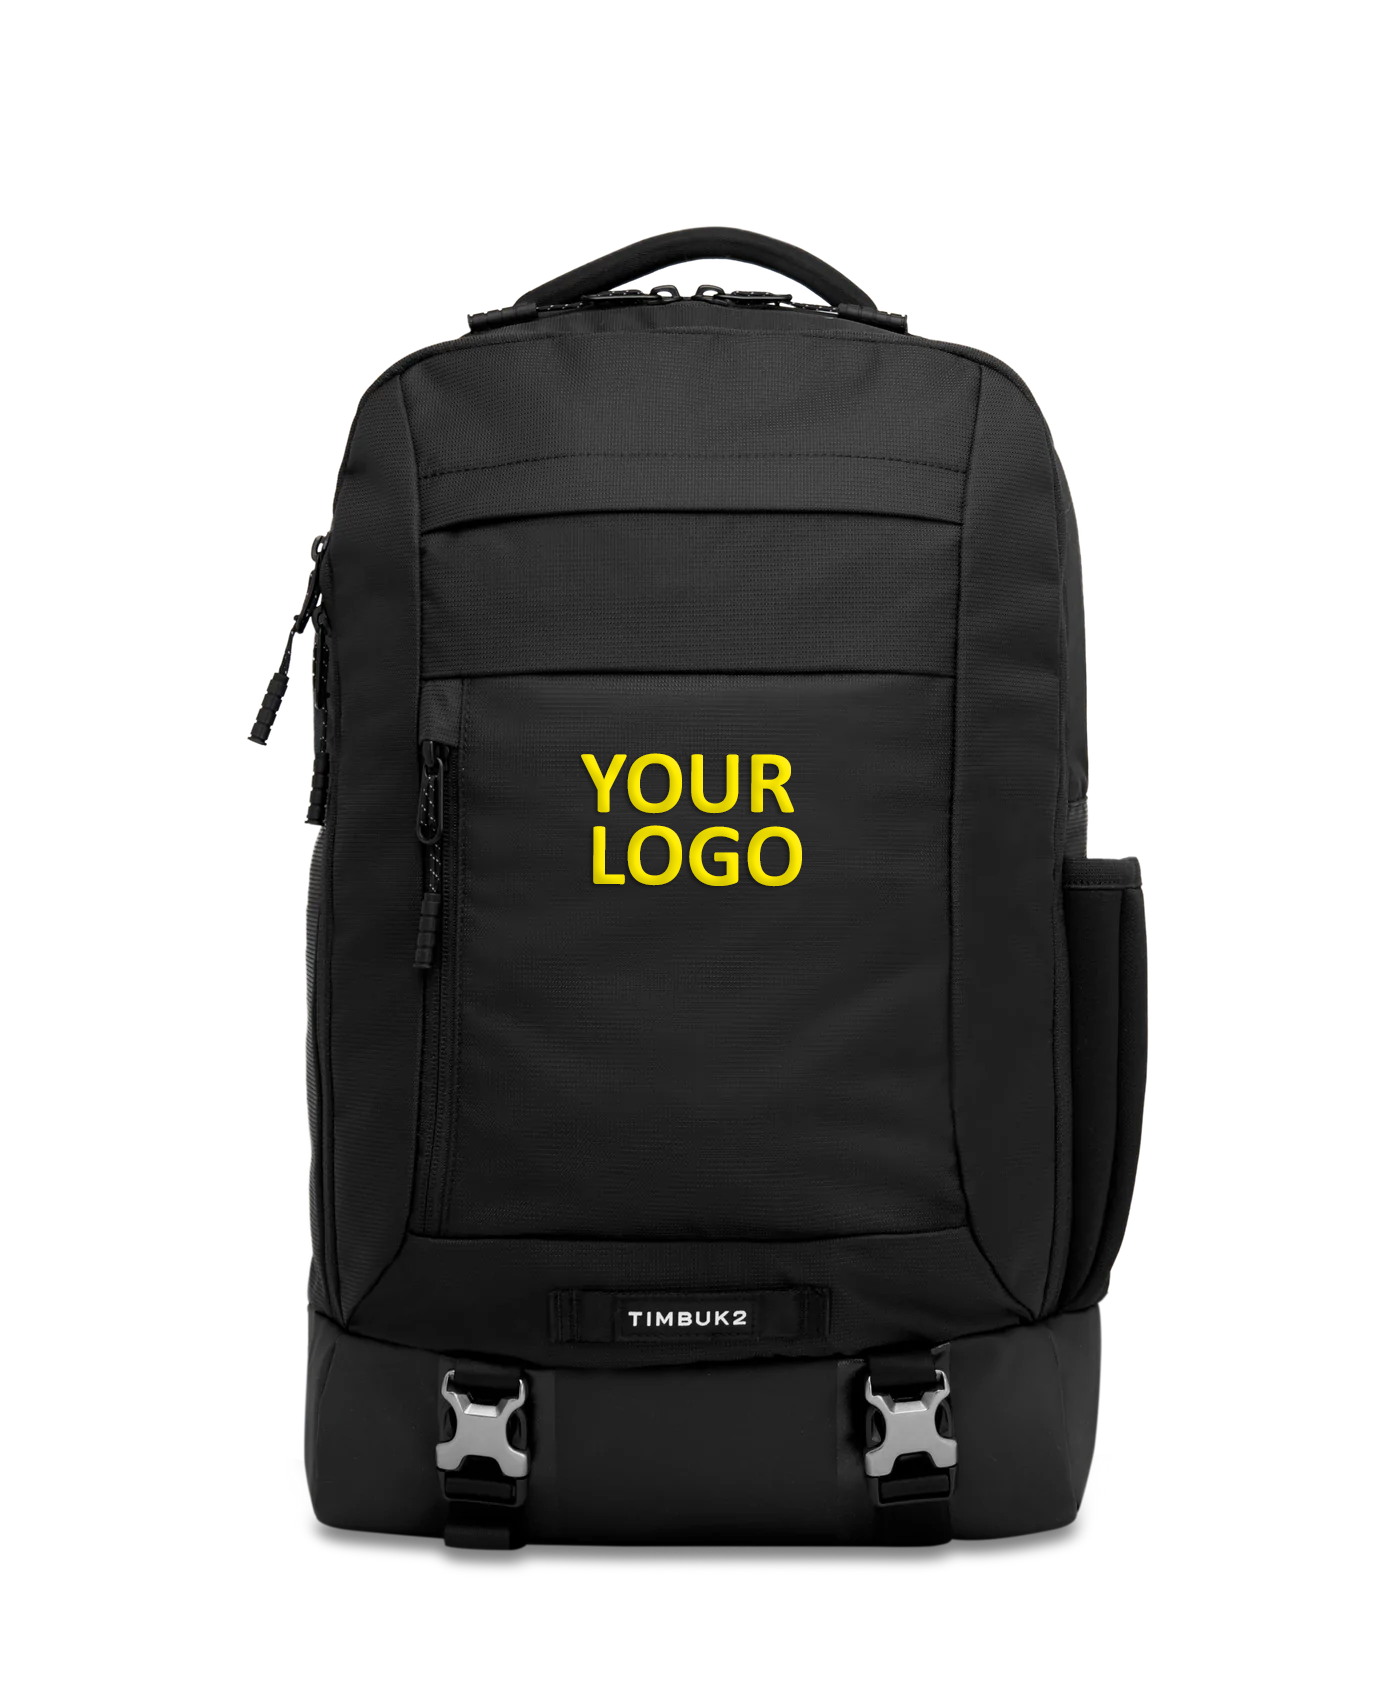 Timbuk2 - Authority Black Deluxe Backpack